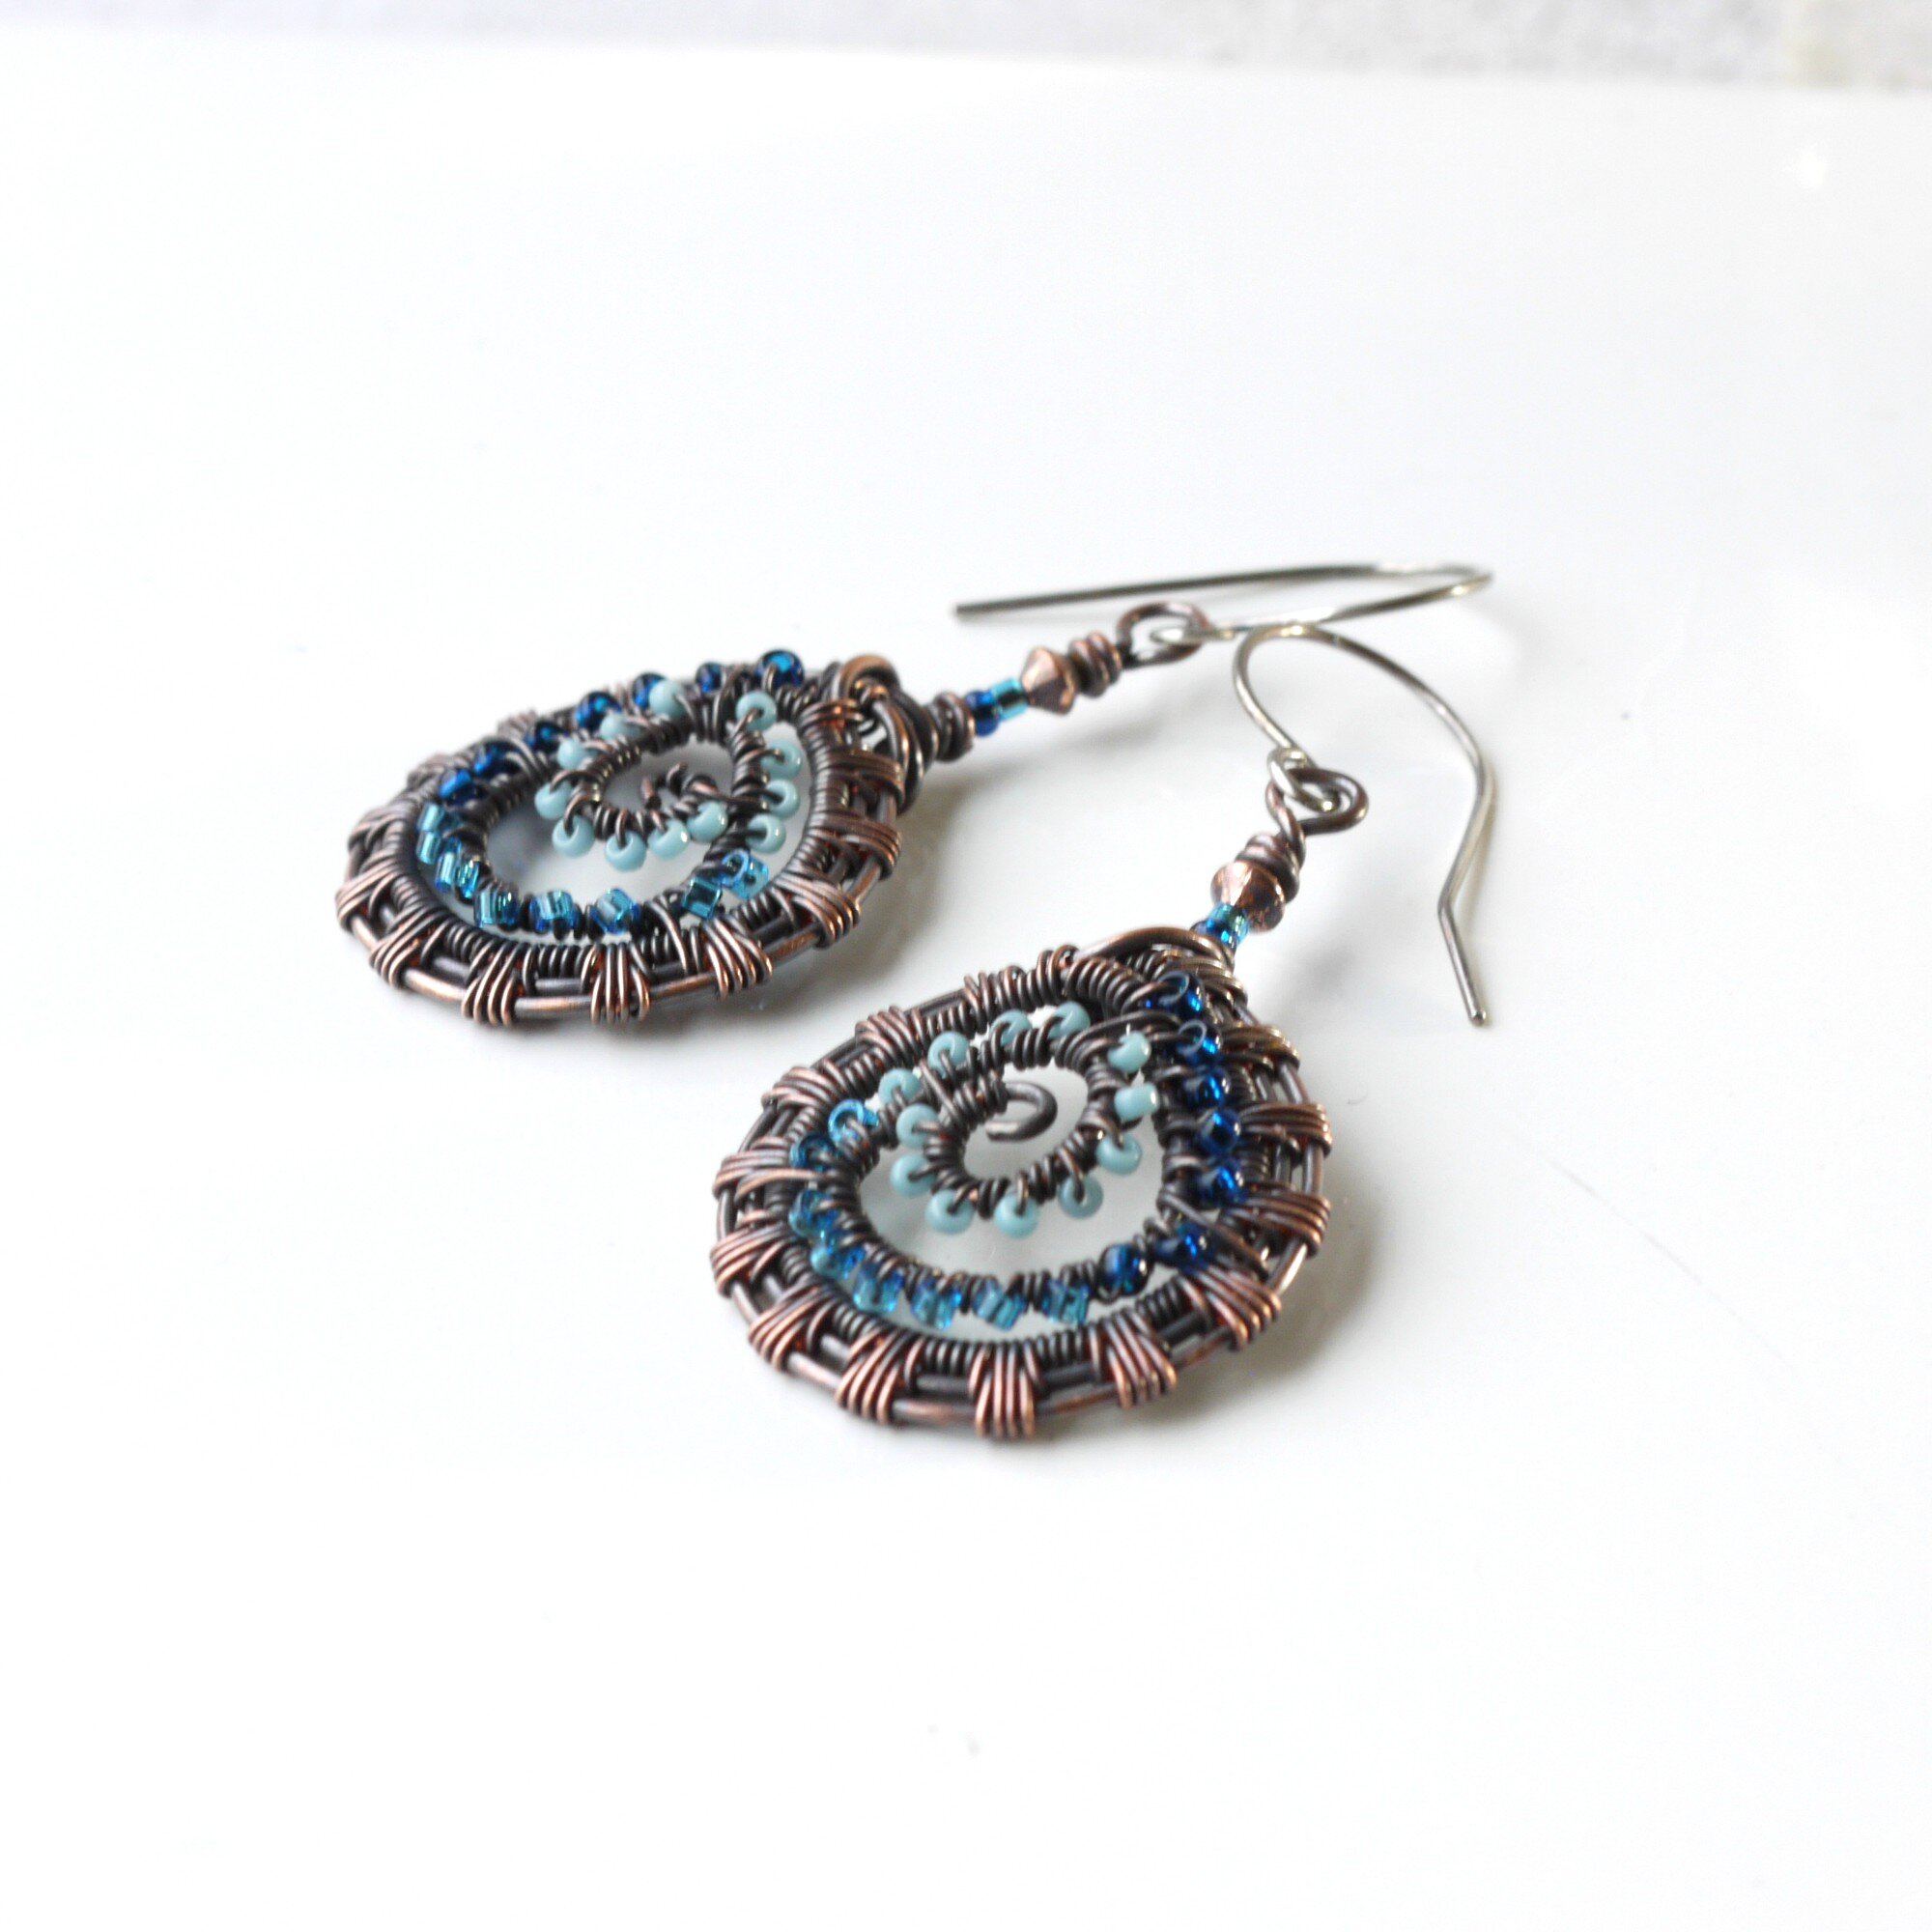 https://images.squarespace-cdn.com/content/v1/58ece8dff7e0ab189ab817d6/1594136368080-VX0WPNNPIW4WS5NAHYVV/6c-blue-bead-copper-wire-woven-fossil-earrings-sterling-silver-artisan-handmade-iris-elm-jewelry.jpg